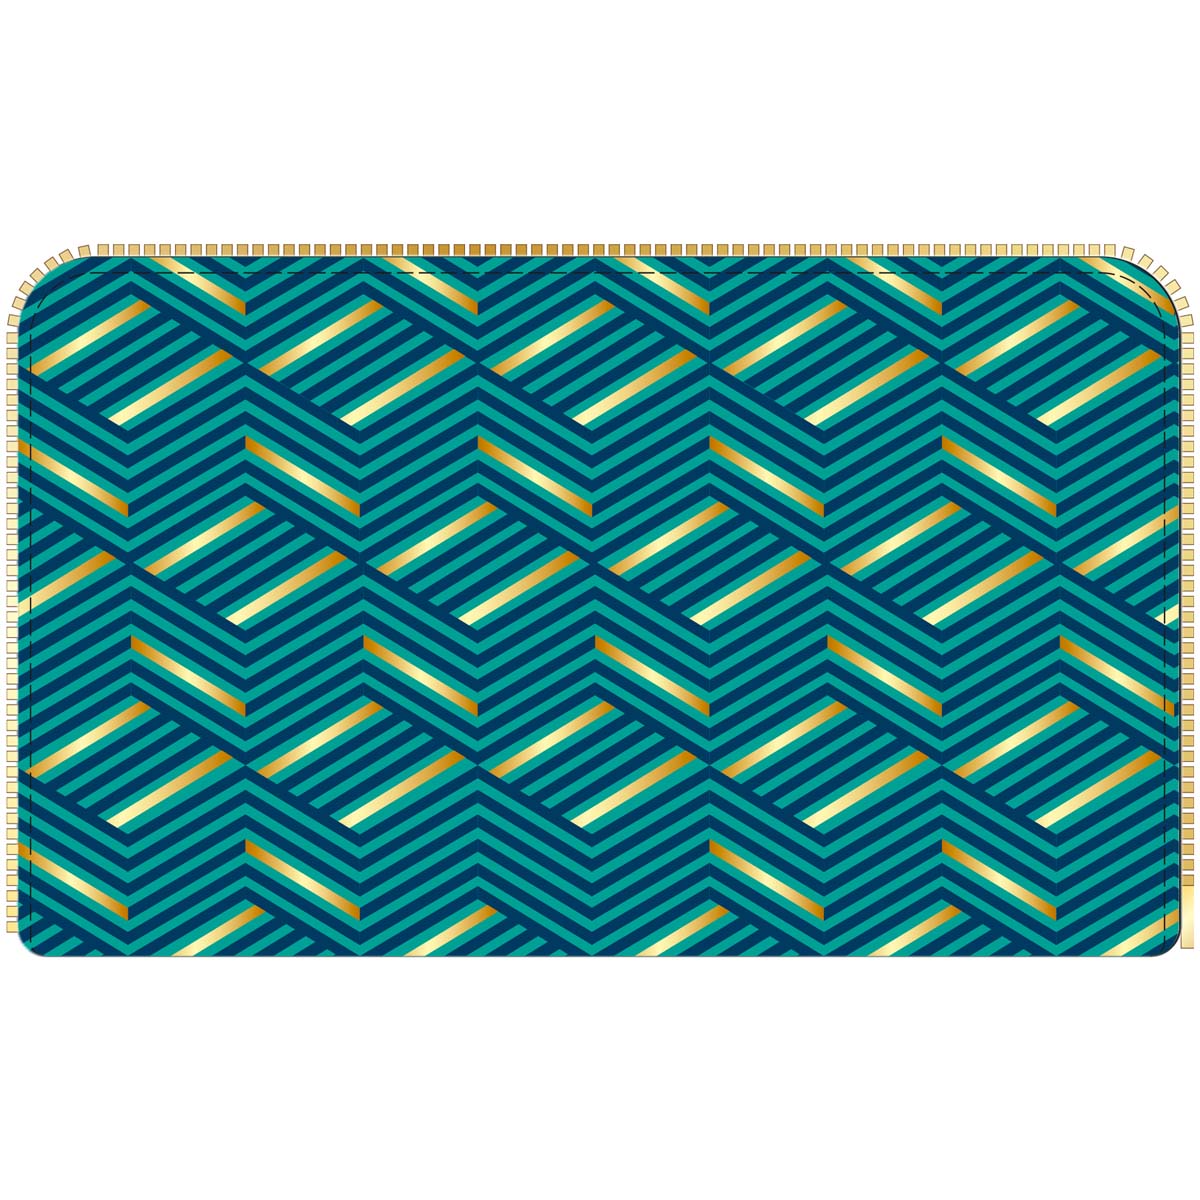 Women's wallet - geometric shapes - green and gold